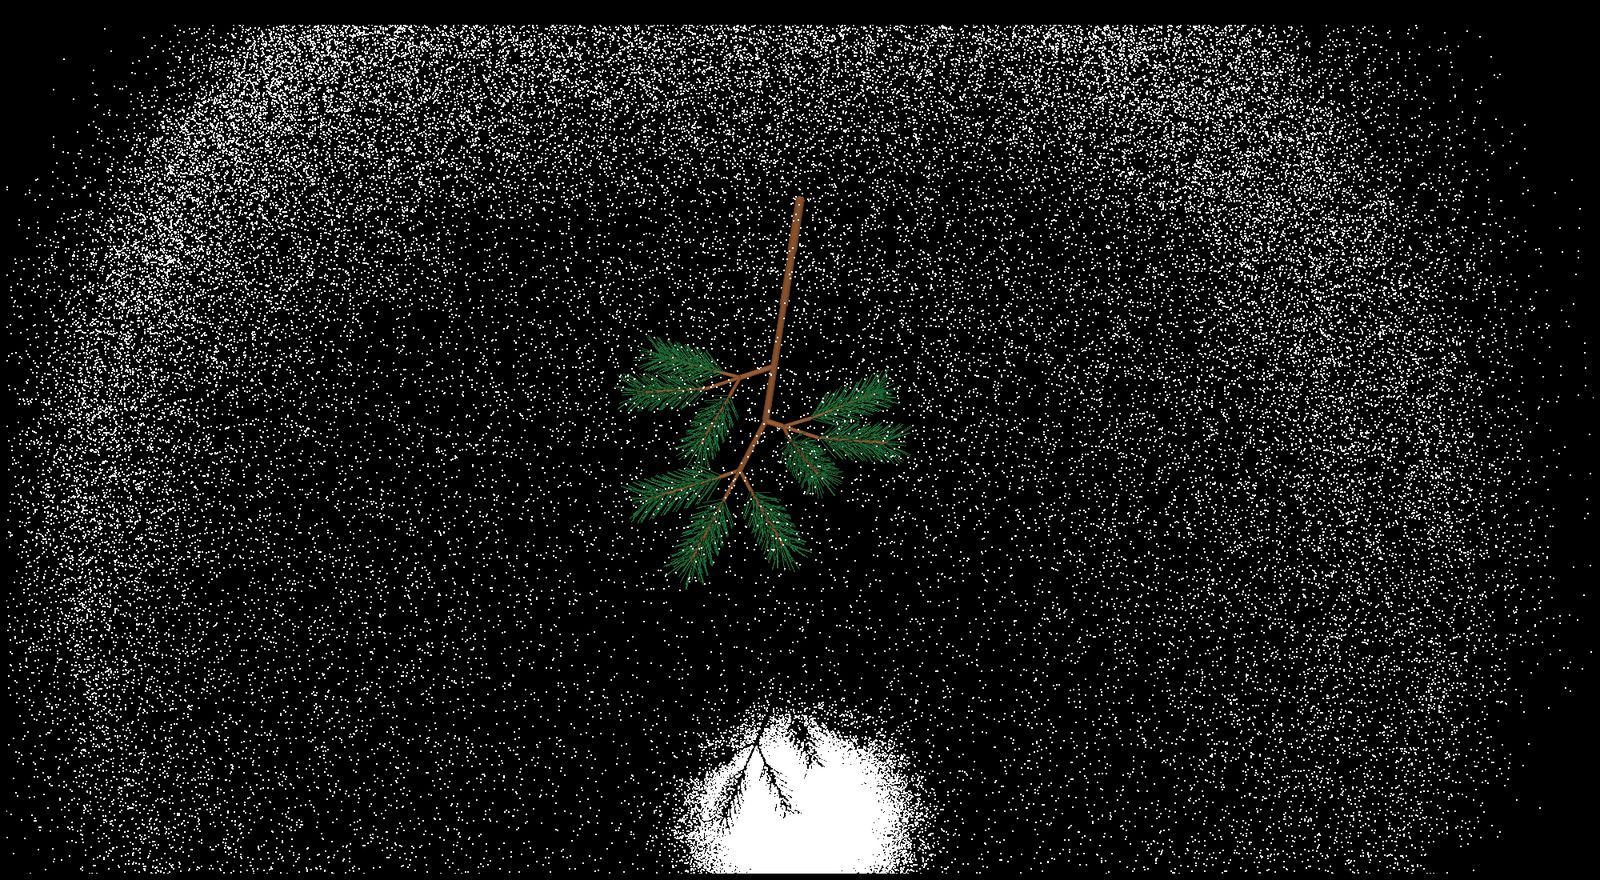 © Sheung Yiu - From the researcher dataset, a simulation showing how light is scattered by a twig.